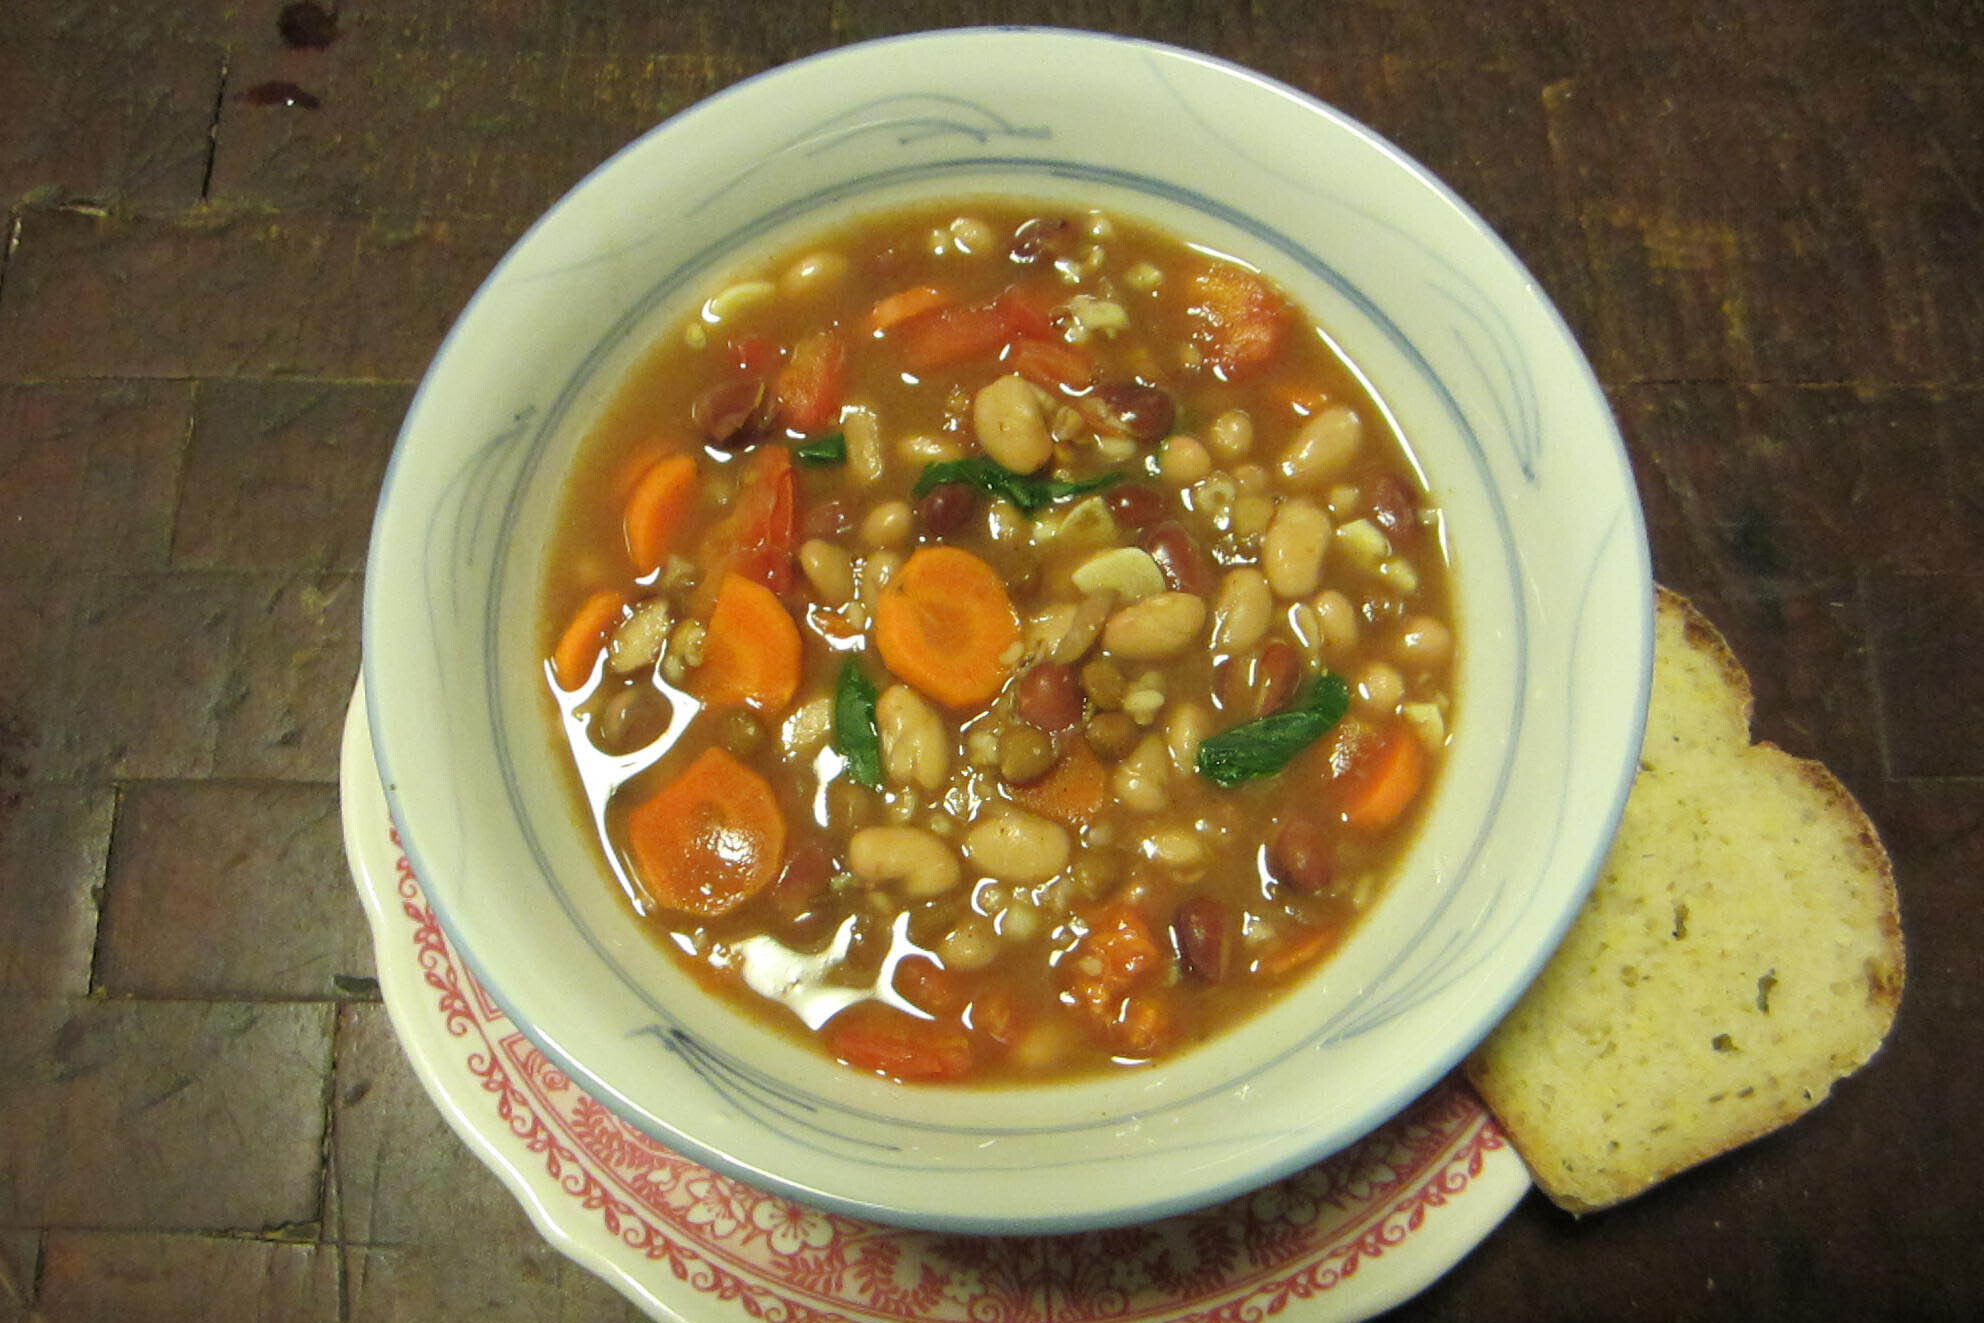 Bowl of vegetable bean soup with a slice of bread on the side